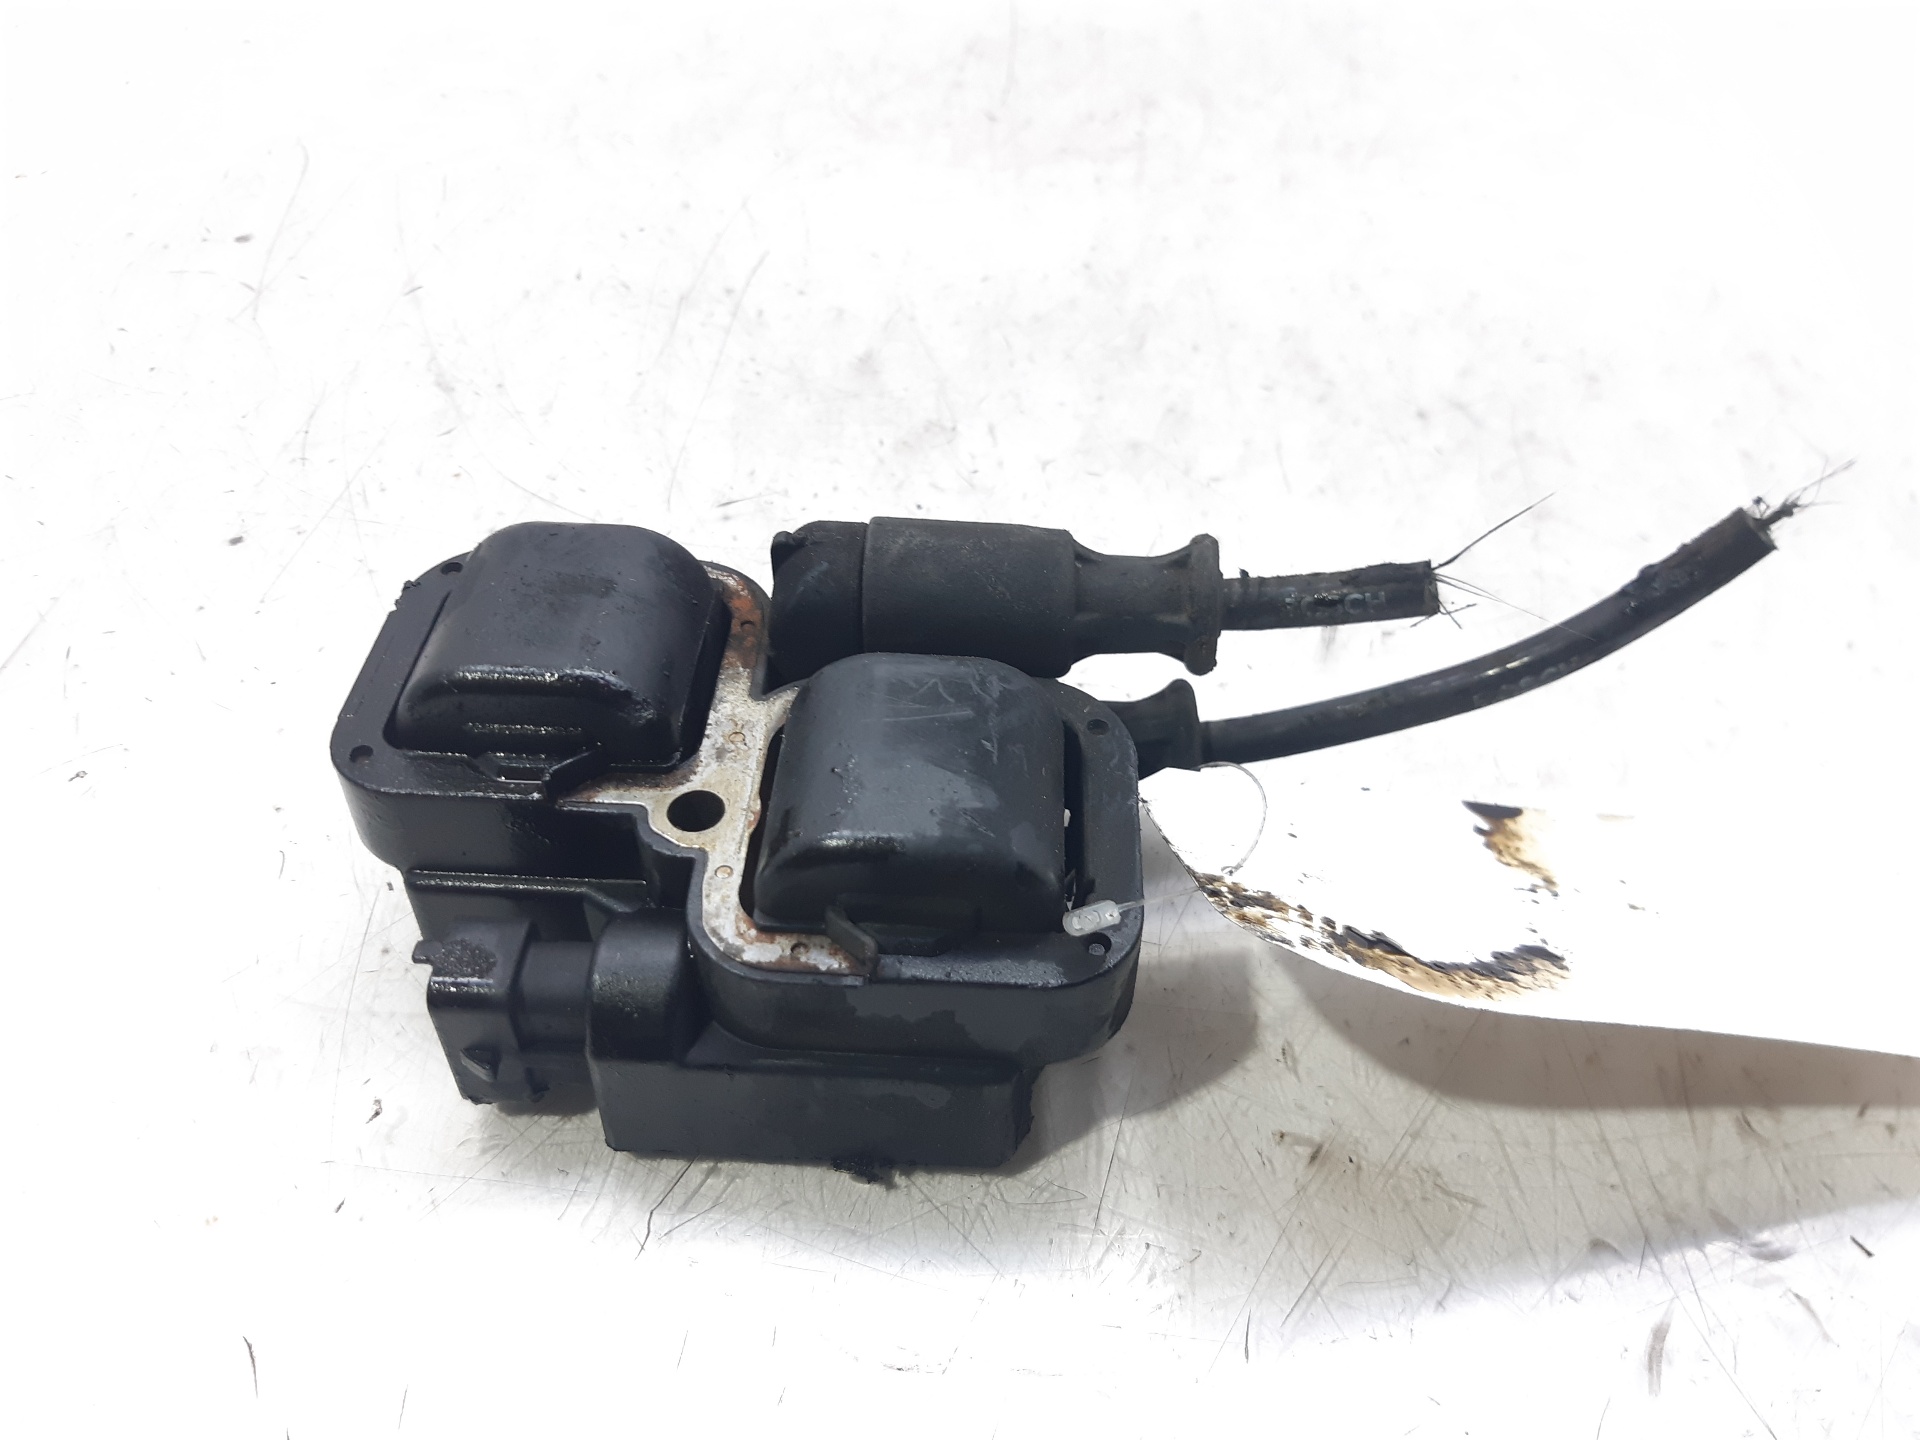 MERCEDES-BENZ C-Class W202/S202 (1993-2001) High Voltage Ignition Coil A0001587303 24045426